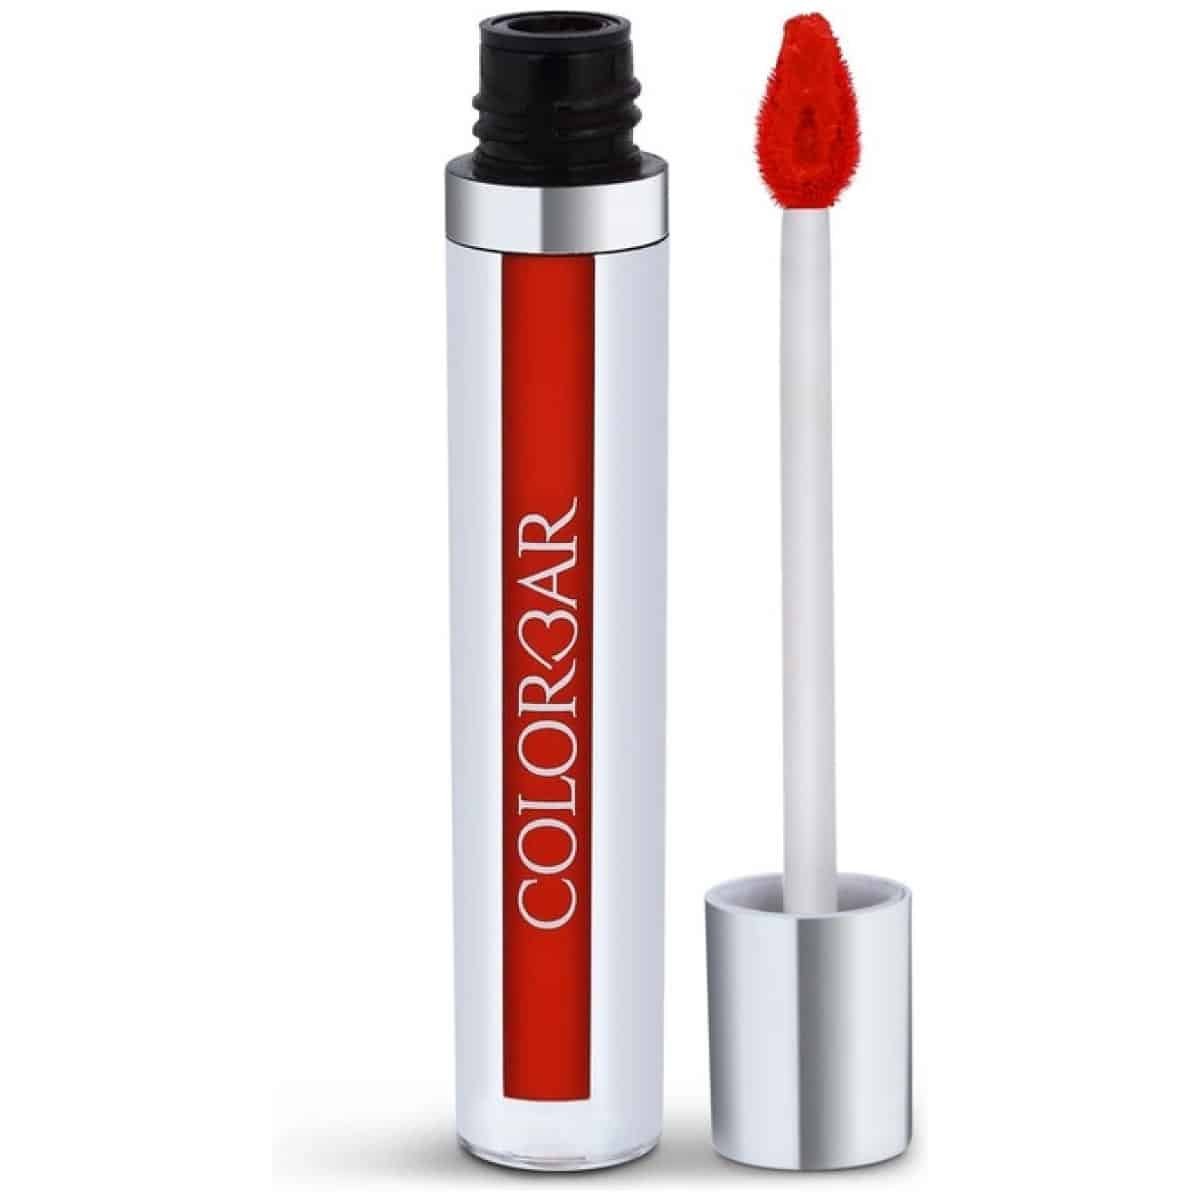 Colorbar Kissproof Lip Stain 016 Naughty You